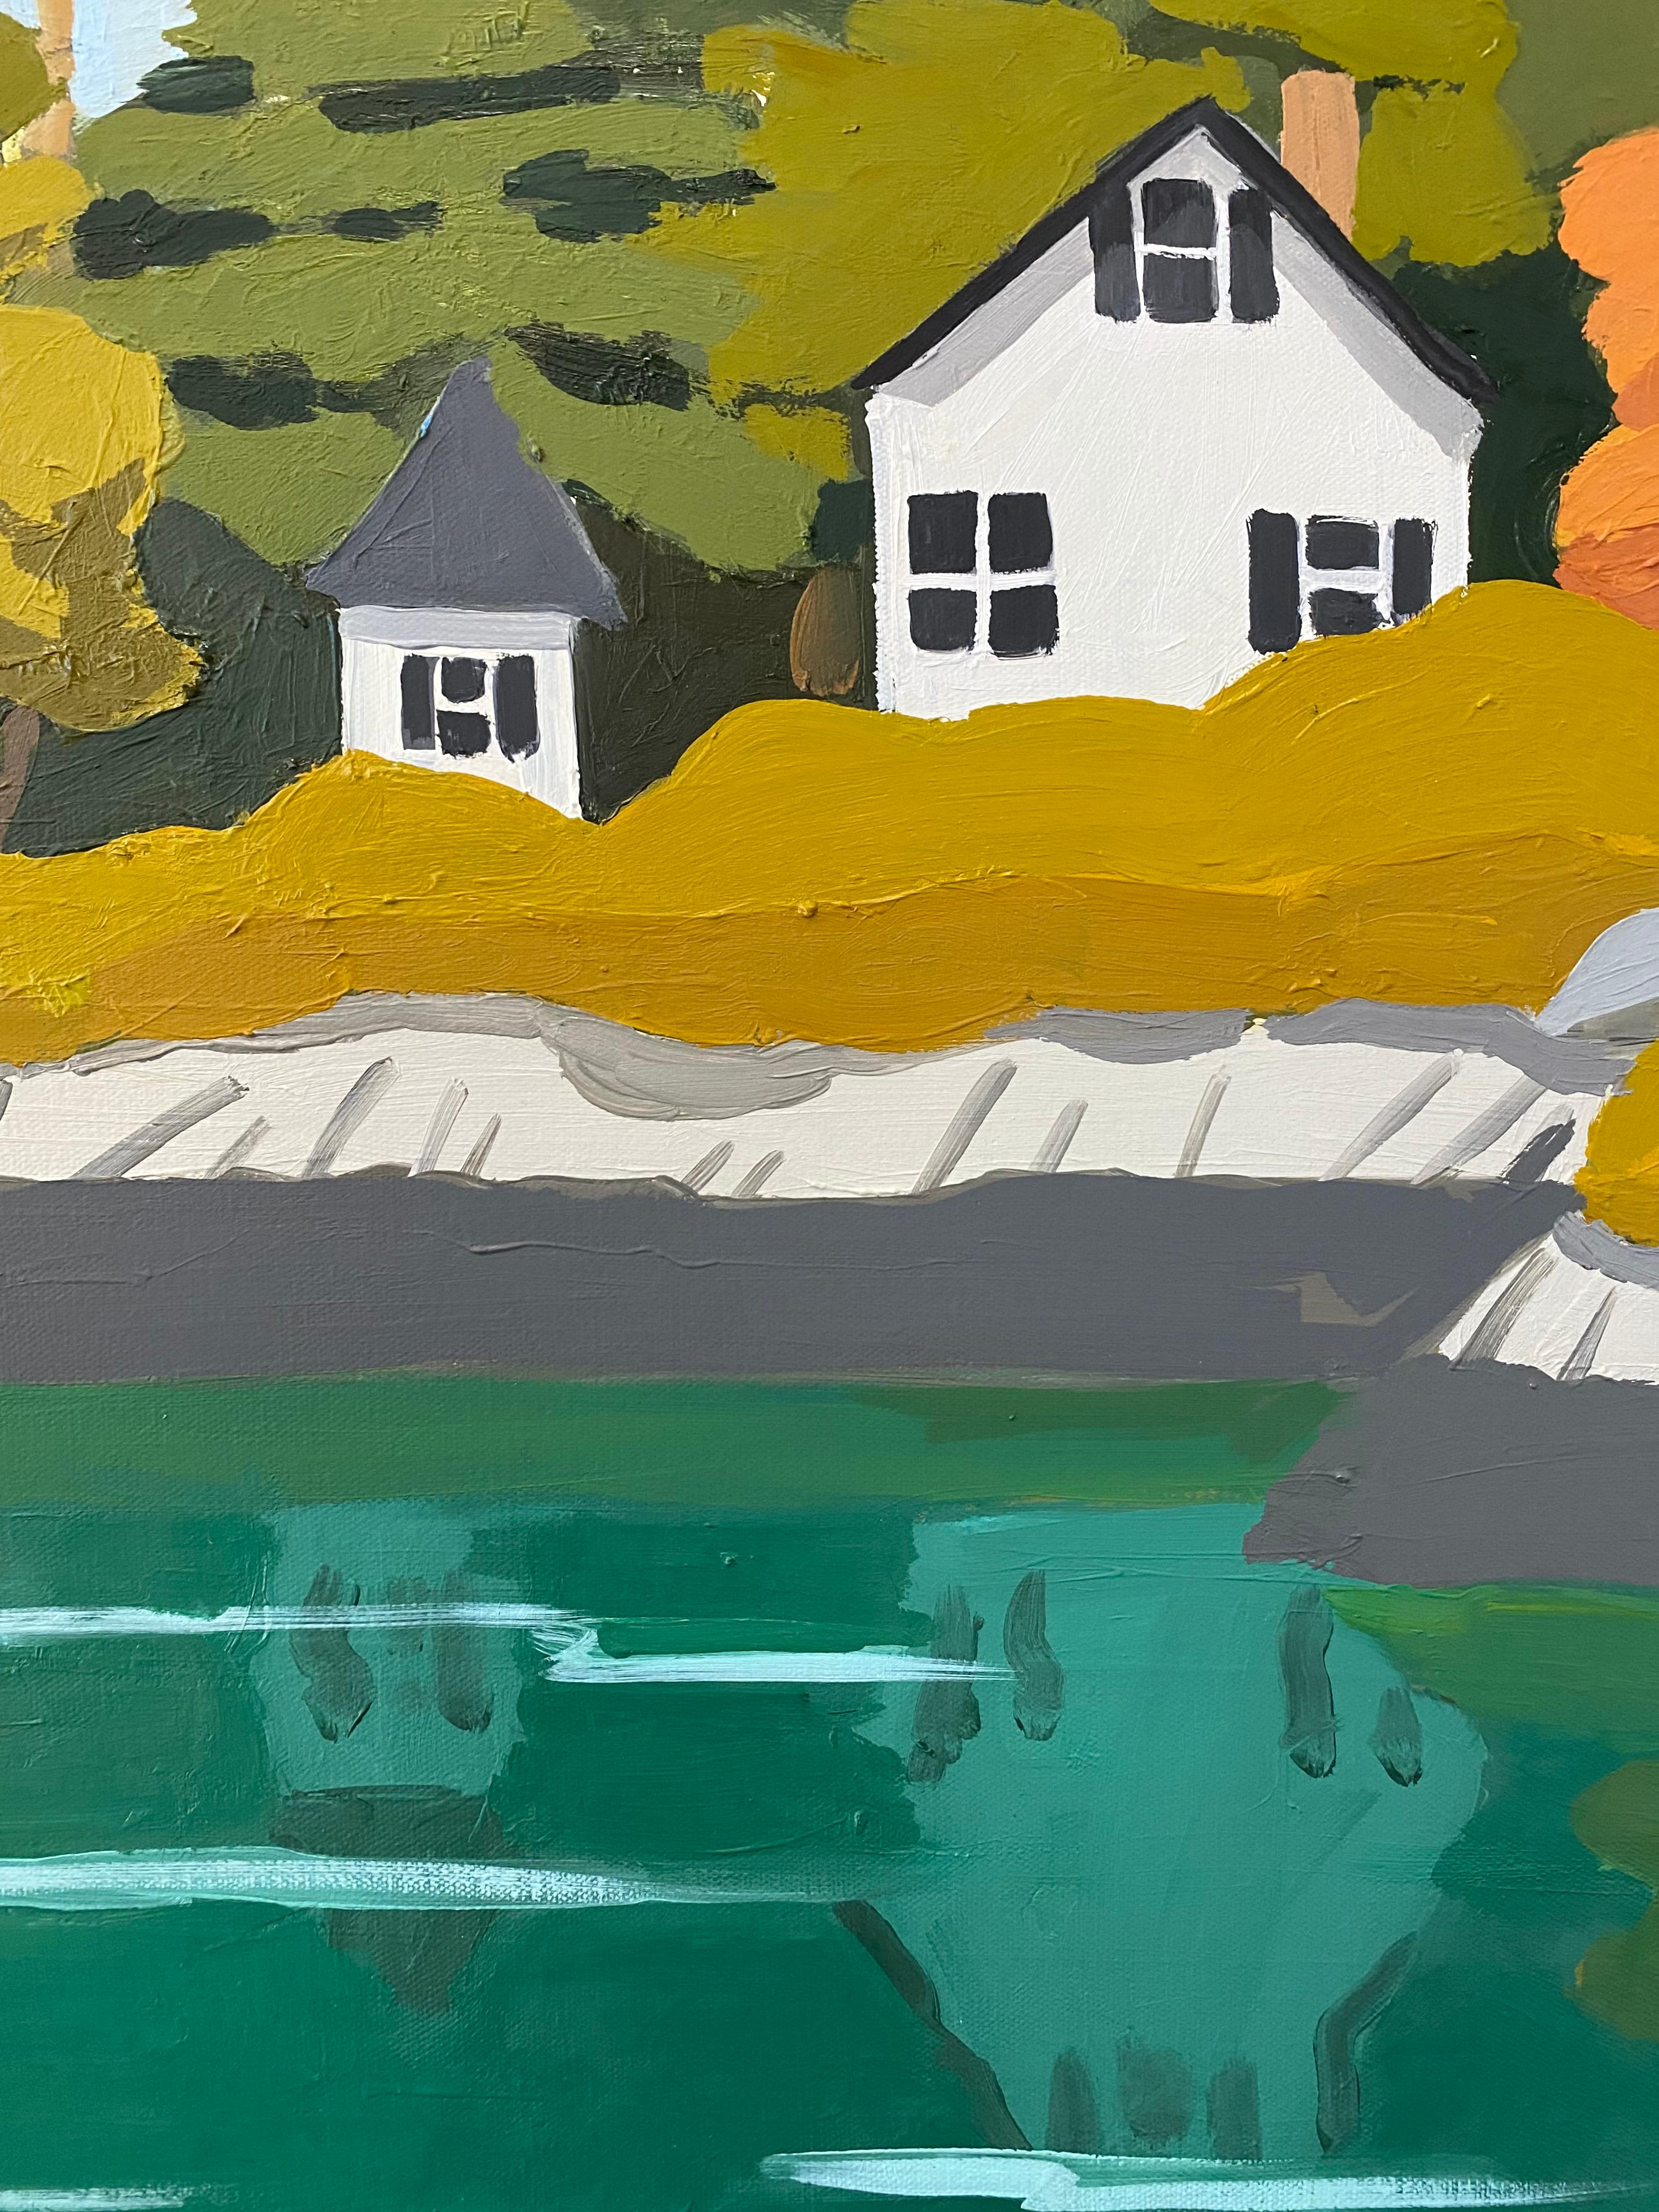 Sheep Island, Maine Landscape, Blue Water, Green Trees, White House on Shoreline - Contemporary Painting by Sophie Treppendahl